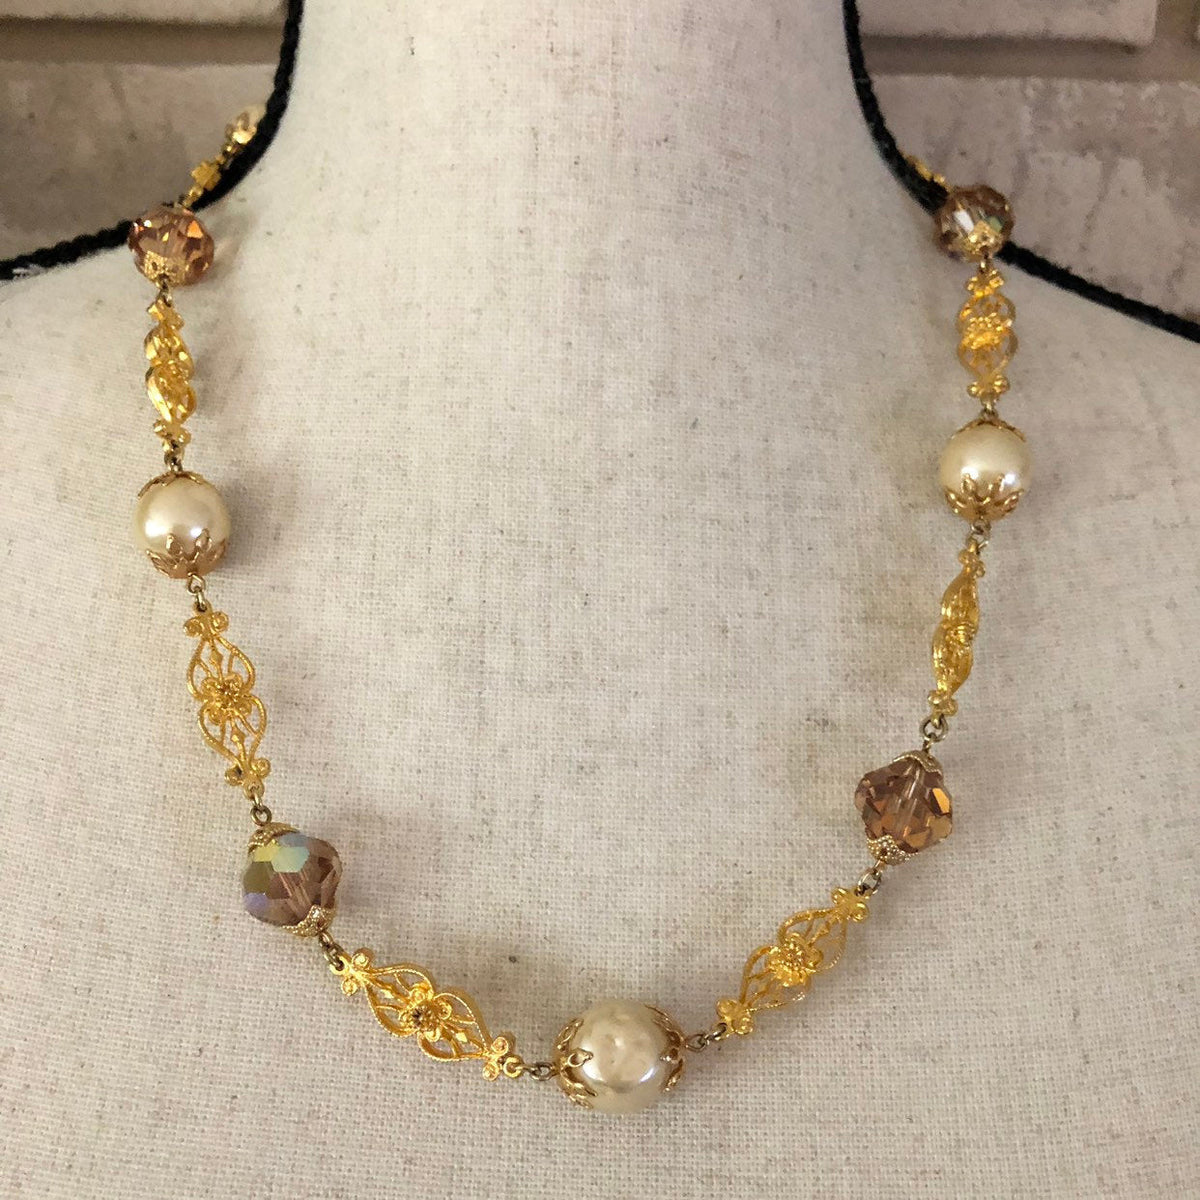 Vintage Vendome Gold Victorian Revival Pearl Necklace - 24 Wishes Vintage Jewelry